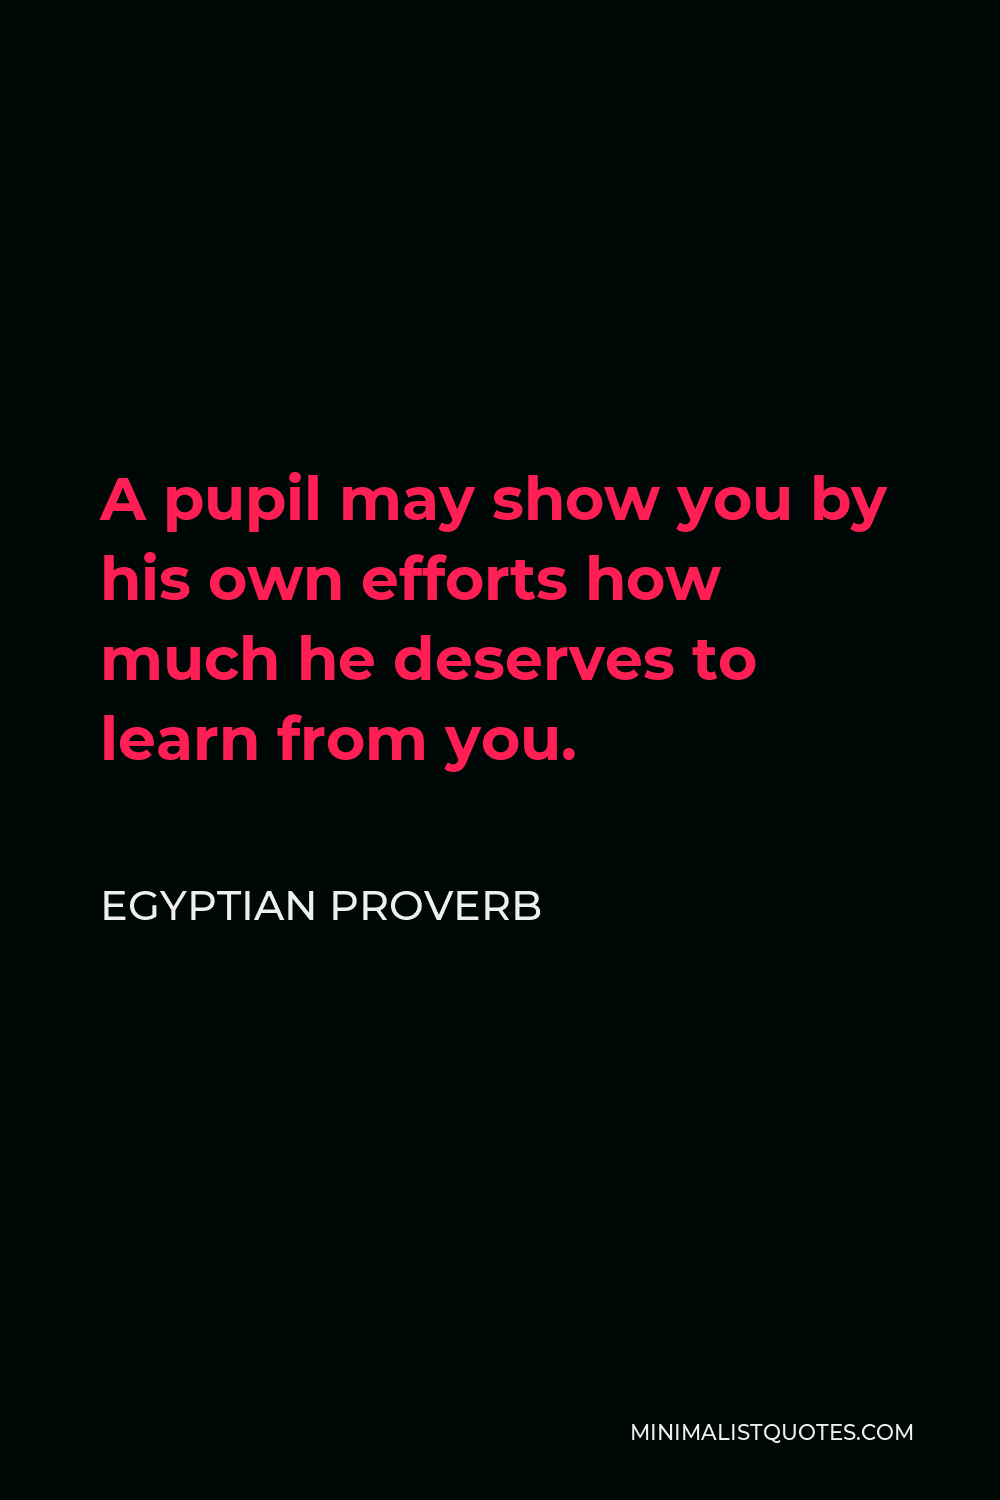 Egyptian Proverb Quote - A pupil may show you by his own efforts how much he deserves to learn from you.